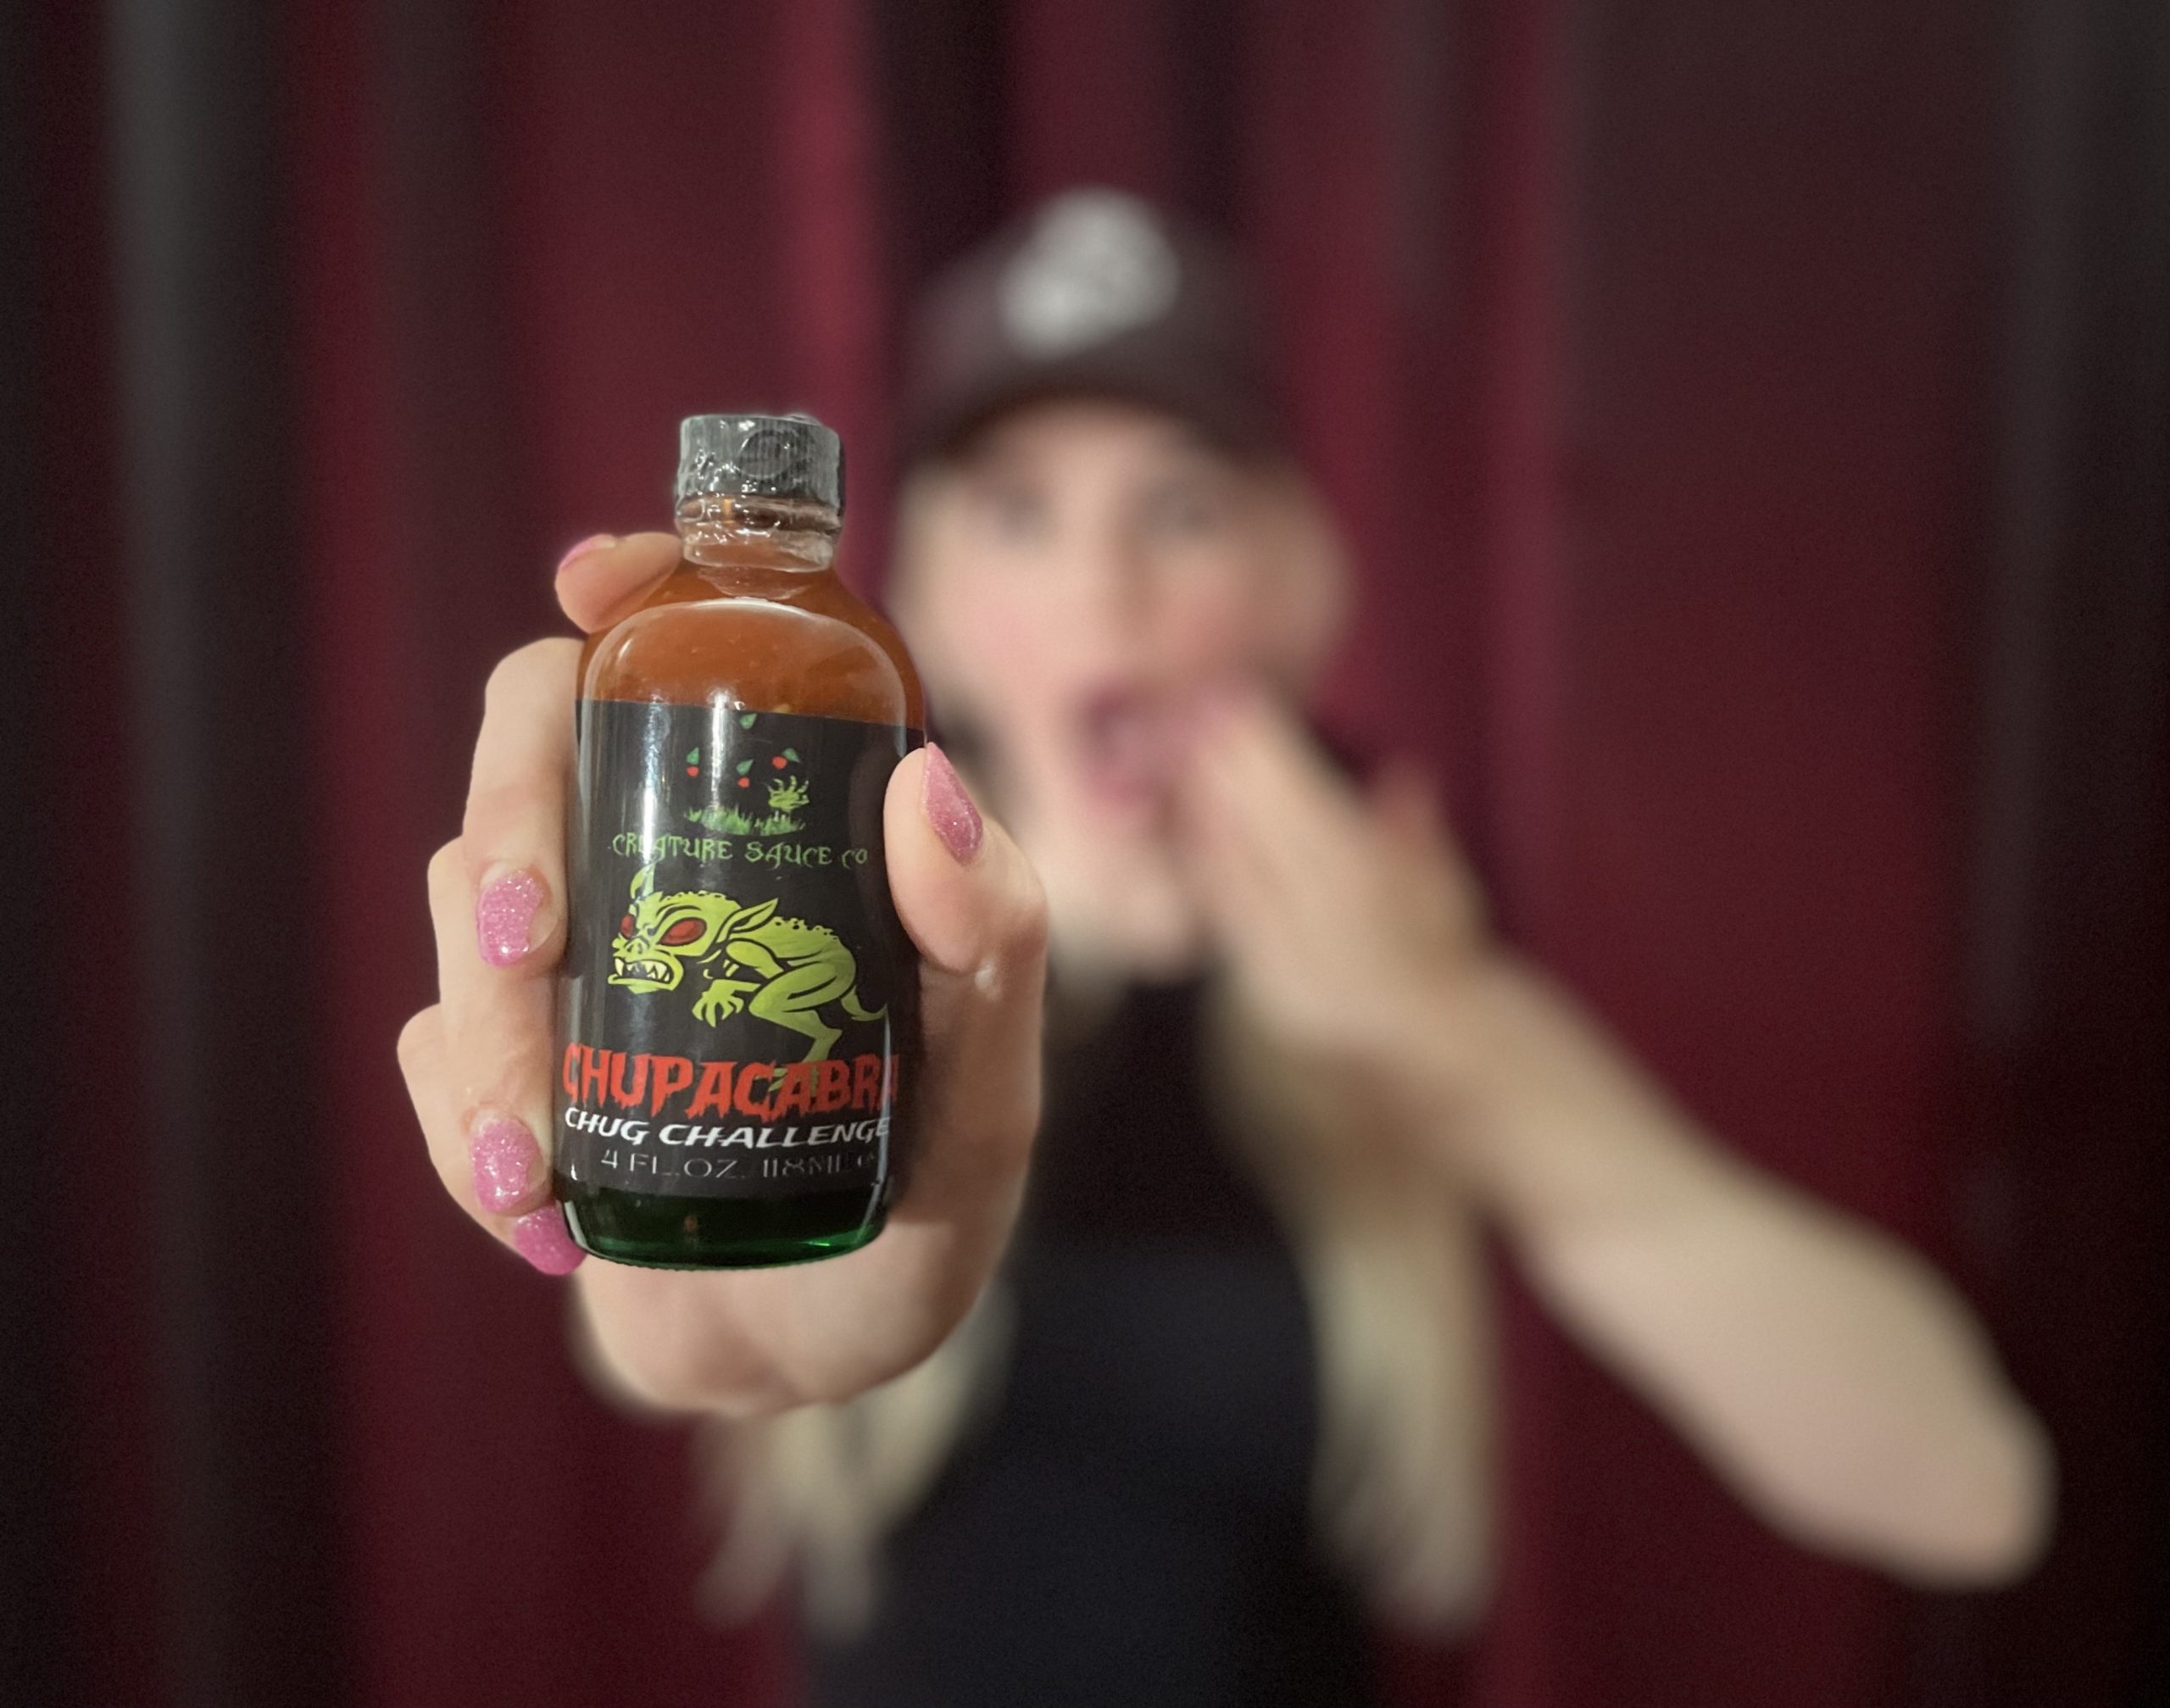 The CHUPACABRA Chug Challenge, made with SUPER HOT PEPPERS by Creature Sauce Co.